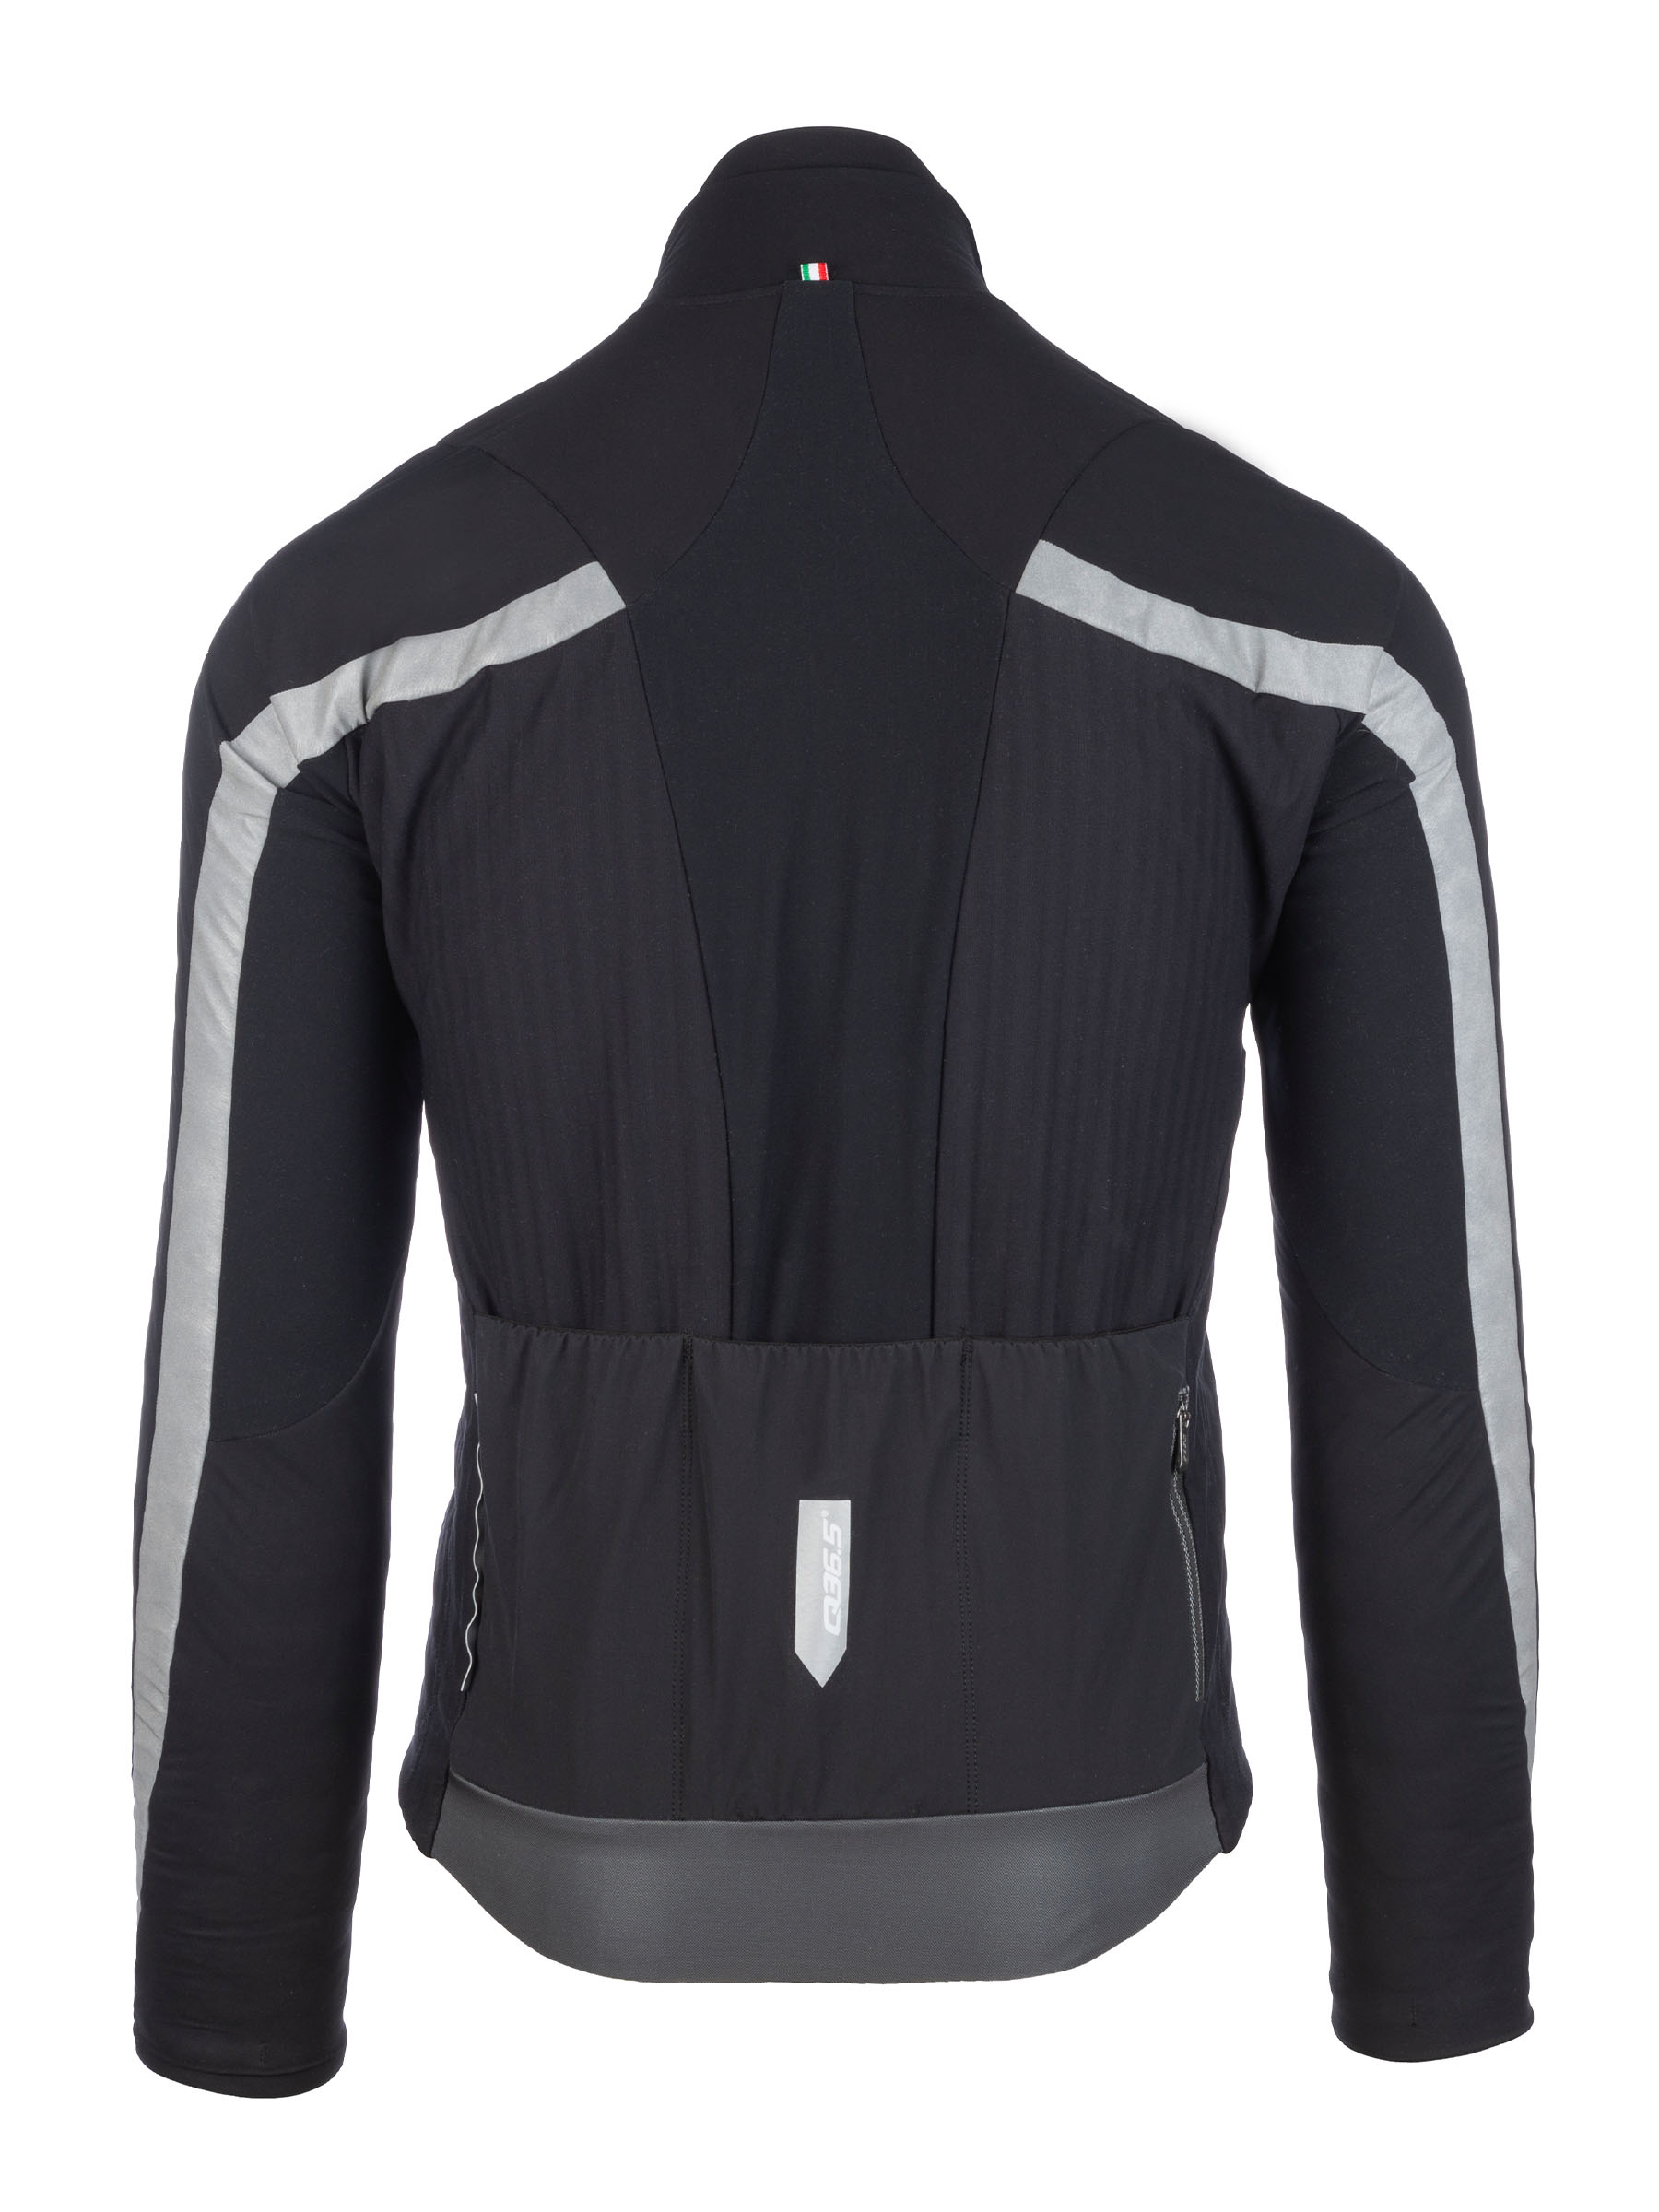 Interval Termica Jacket winter cycling for jacket • black, mens thermal